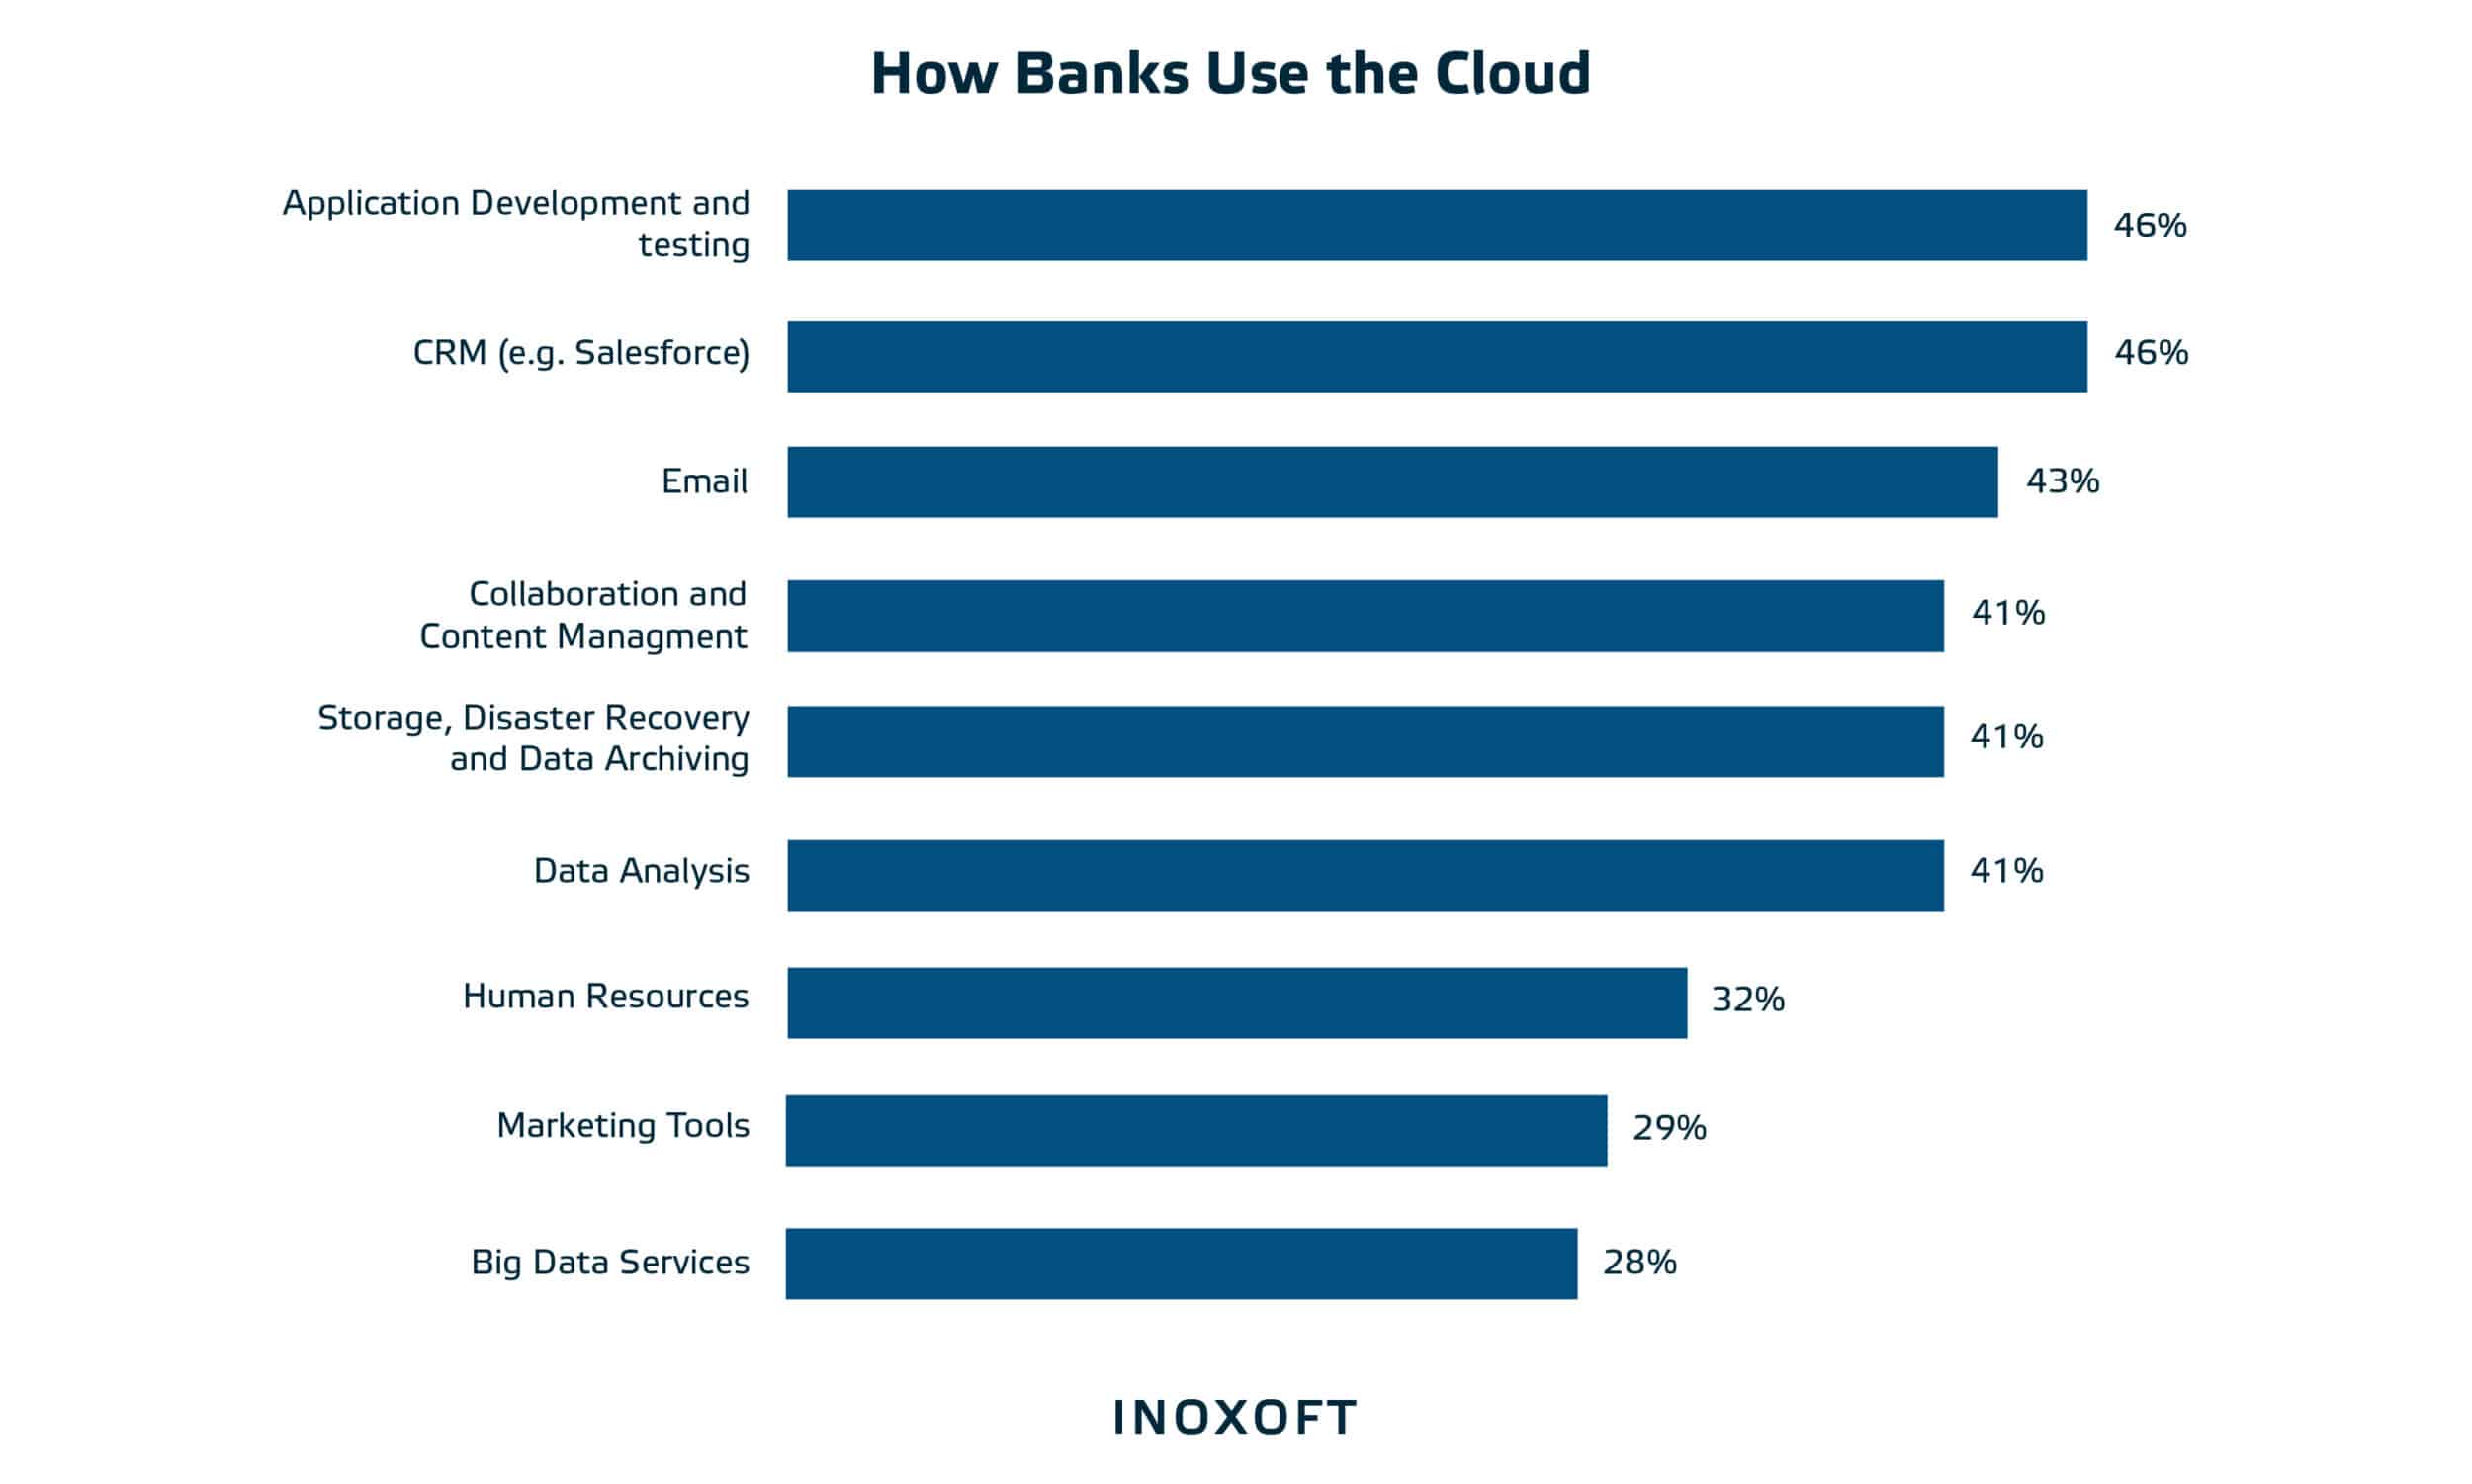 Core applications of cloud computing for banking